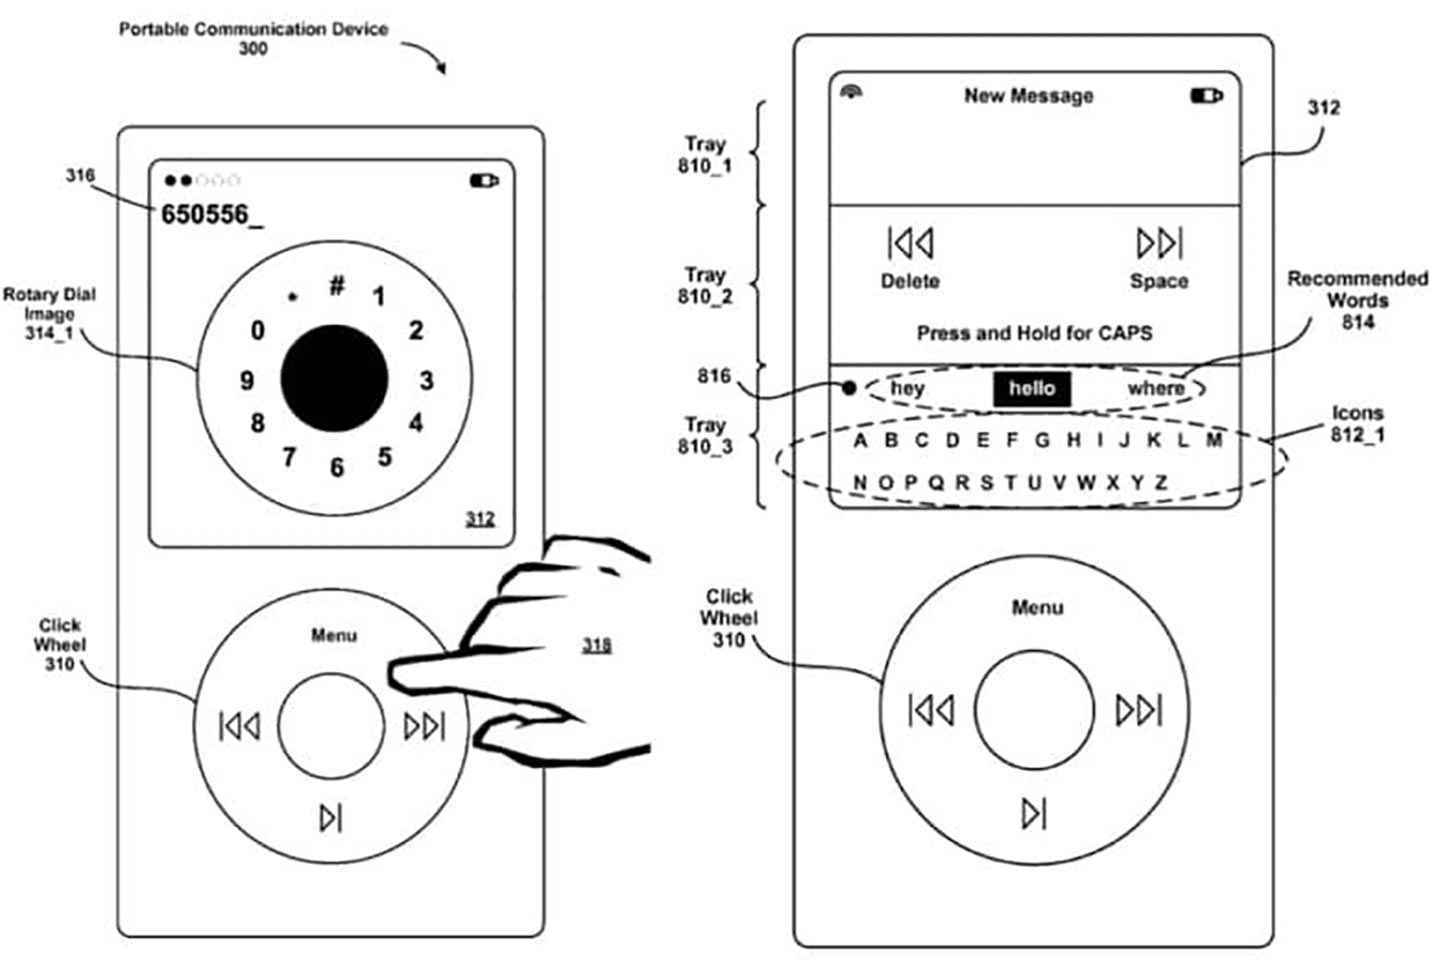 Foto: Apple/United States Patent and Trademark Office